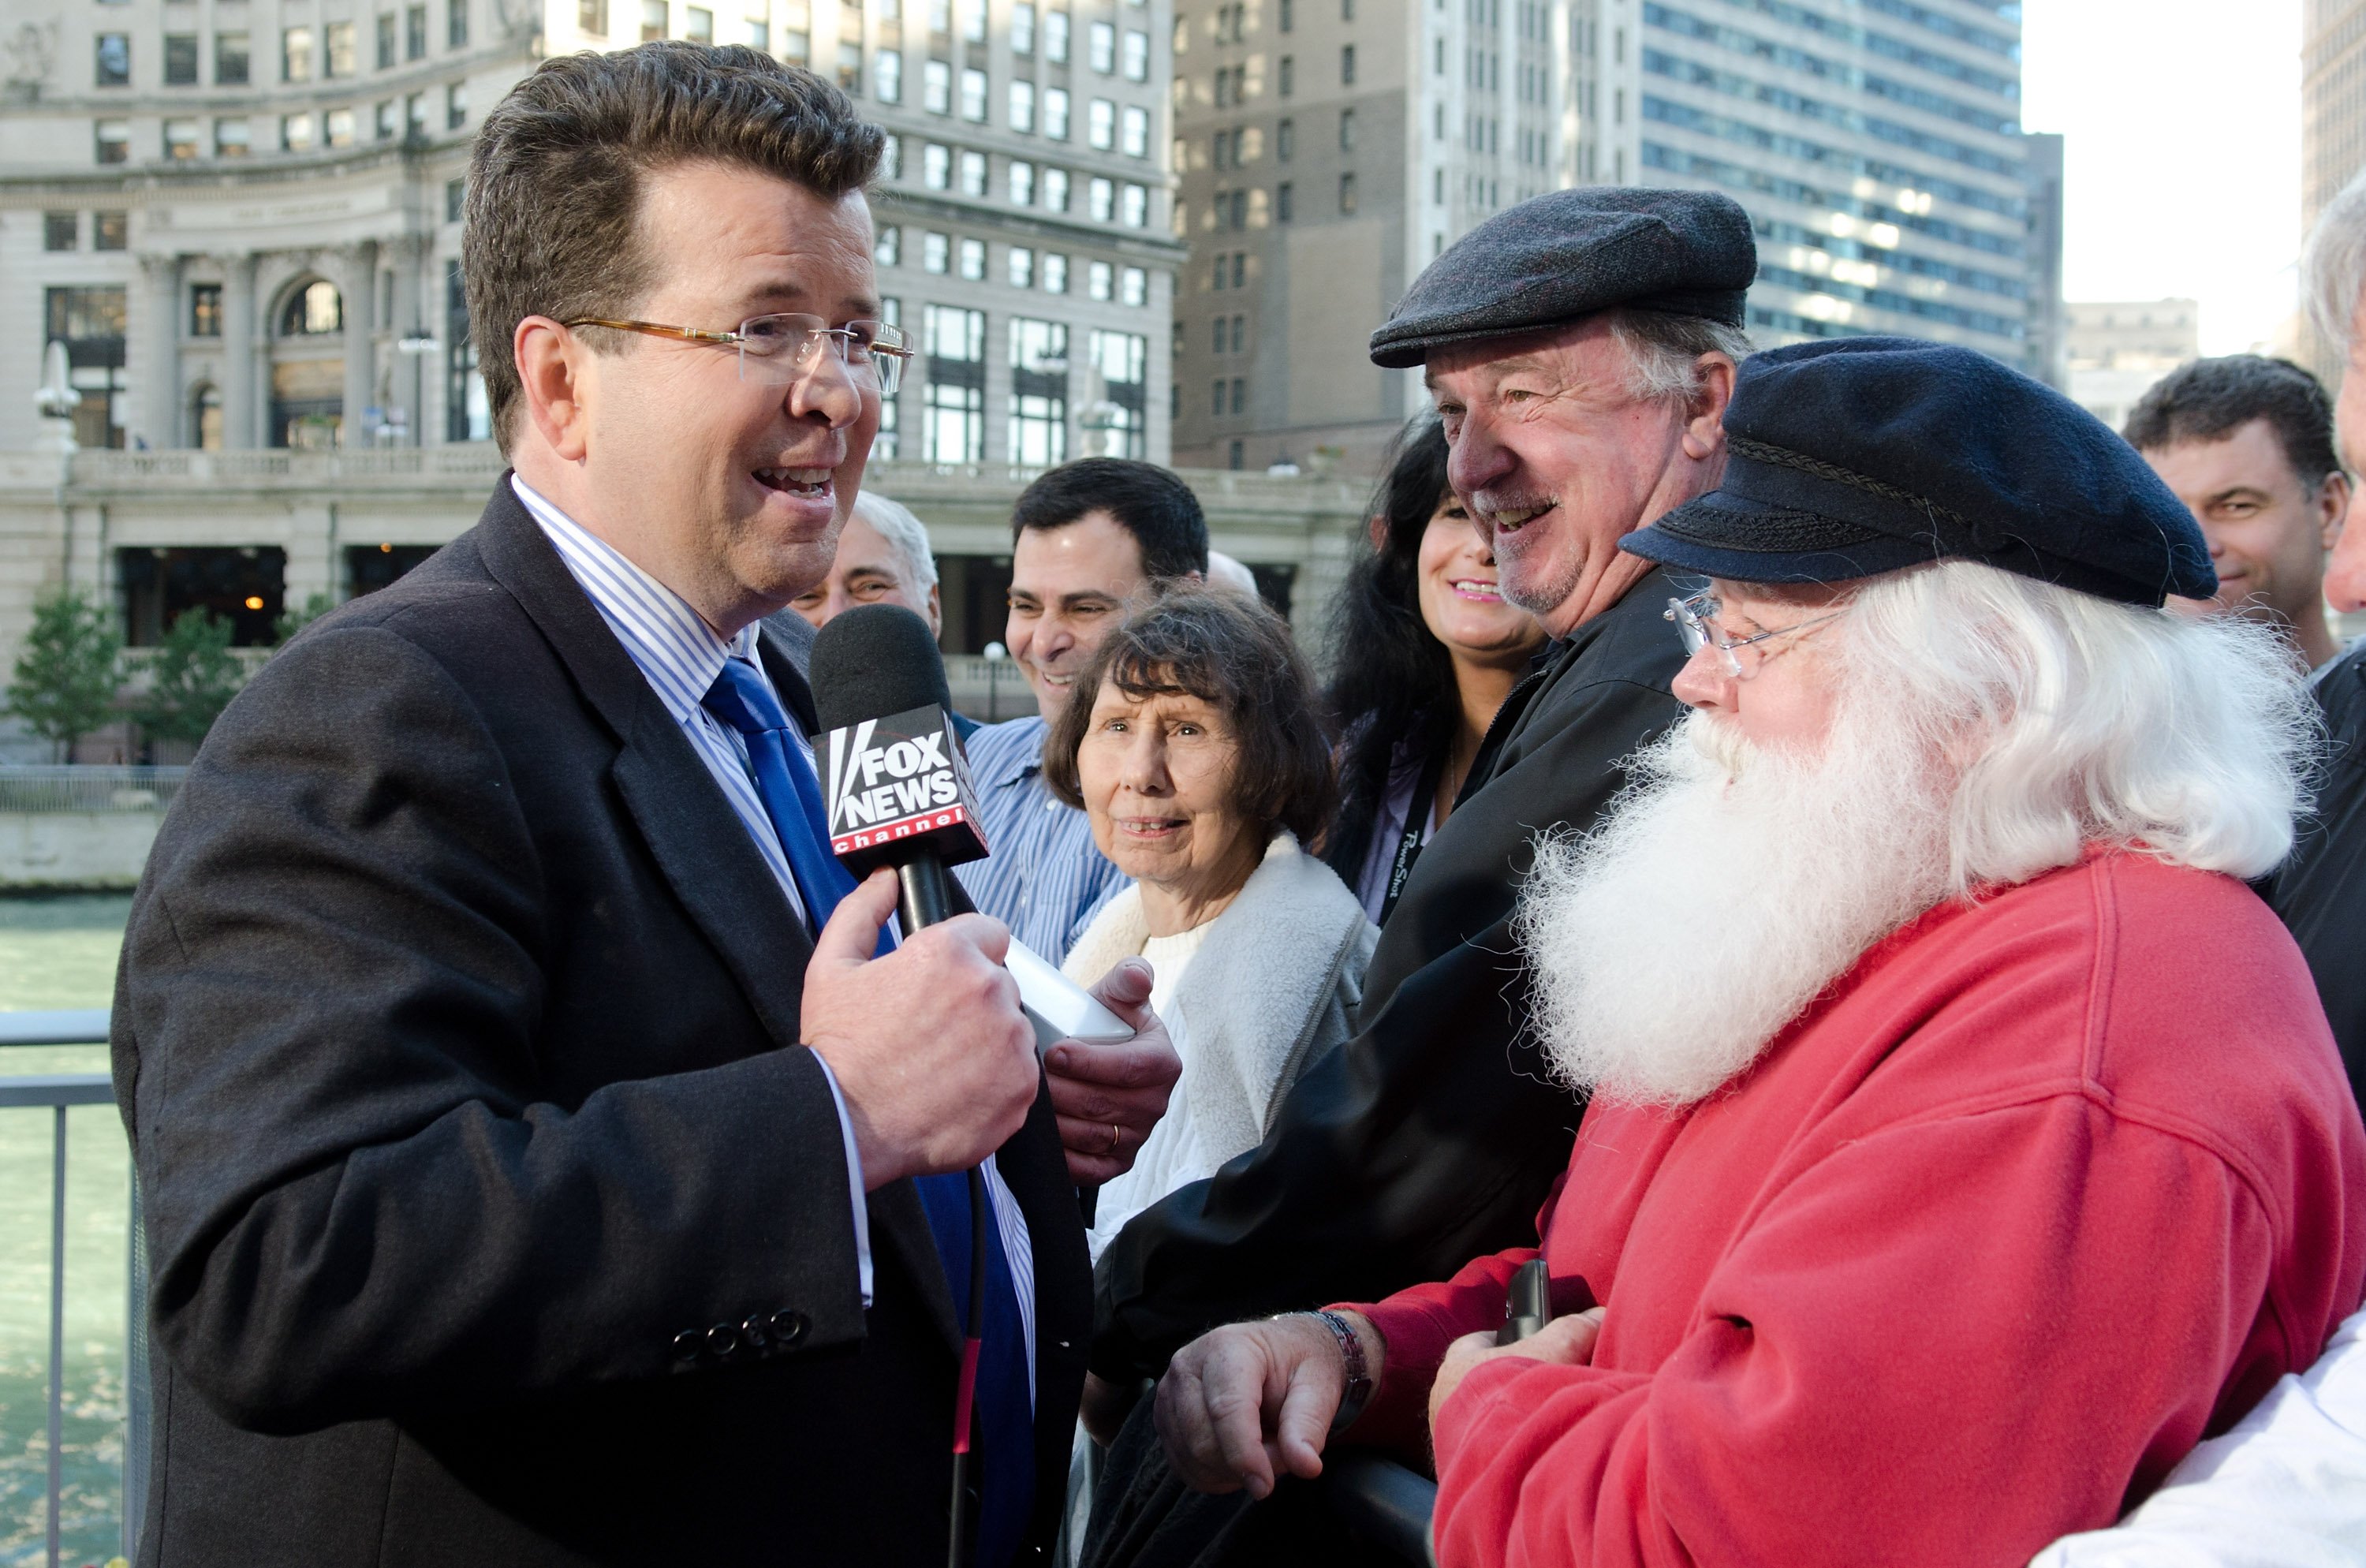 Neil Cavuto speaks with the audience during FOX's "Your World with Cavuto" live from the River Walk at Trump International Hotel & Tower on October 3, 2011 in Chicago, Illinois. | Source: Getty Images